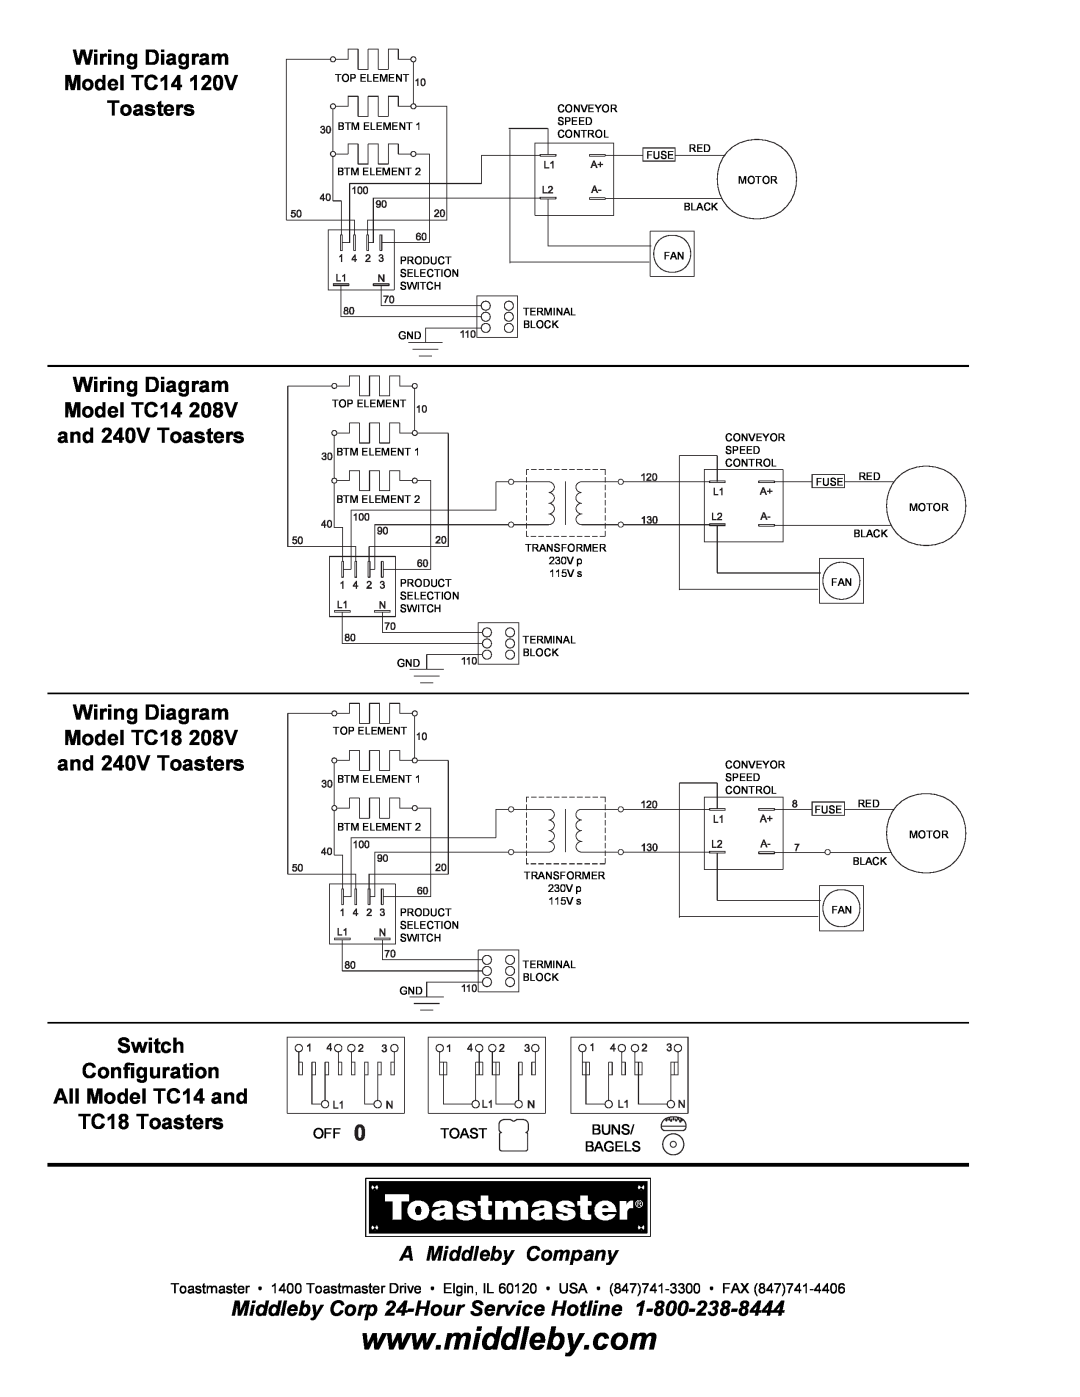 Toastmaster Wiring Diagram Model TC14 Toasters, Wiring Diagram Model TC14 and 240V Toasters, TC18 Toasters 